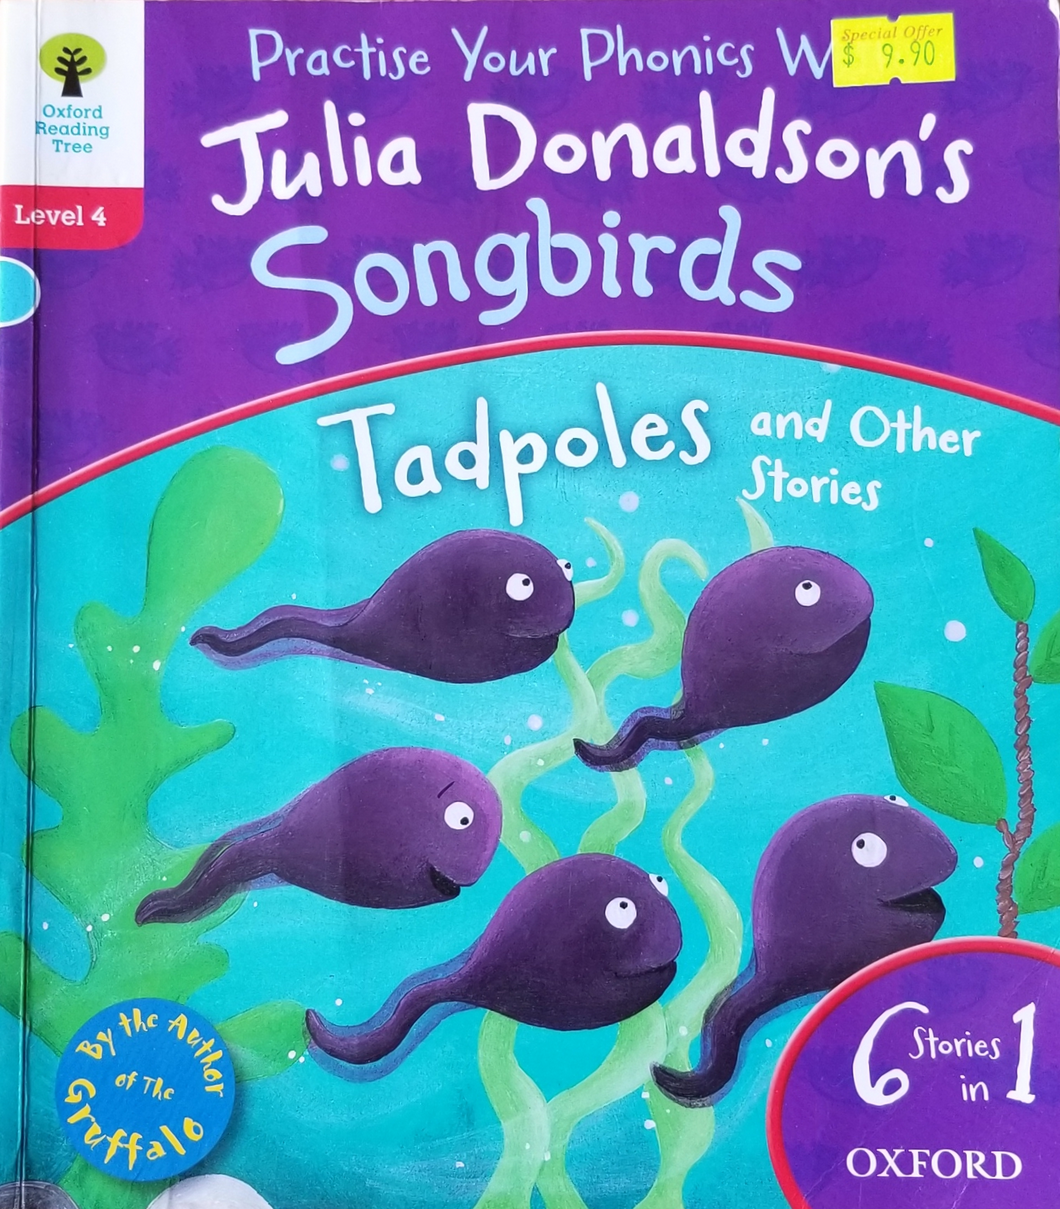 Oxford Reading Tree Songbirds: Level 4: Tadpoles and Other Stories - Julia Donaldson & Clare Kirtley